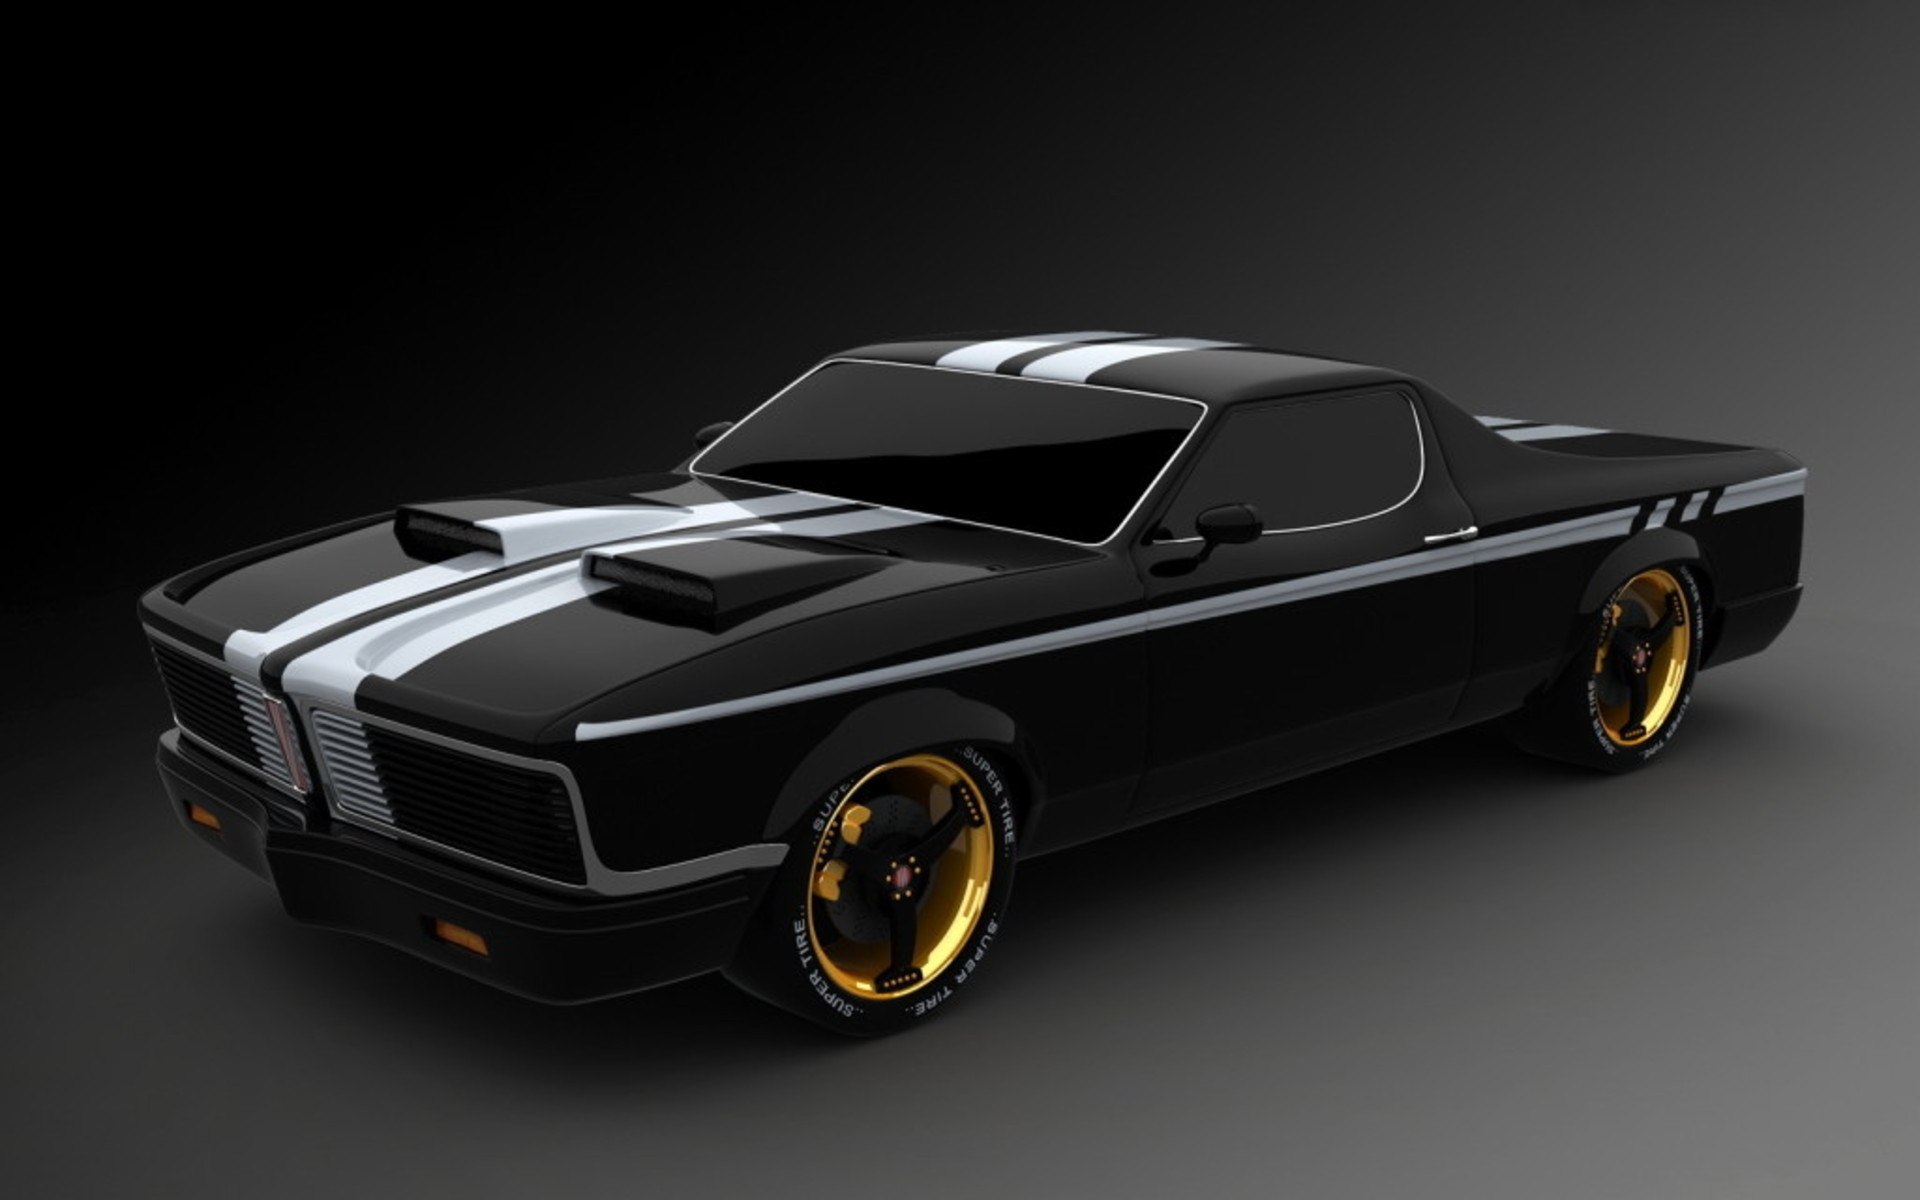 1920x1200 muscle cars | American Muscle Car Wallpaper 5673 Hd Wallpapers in Cars -  Imagesci .